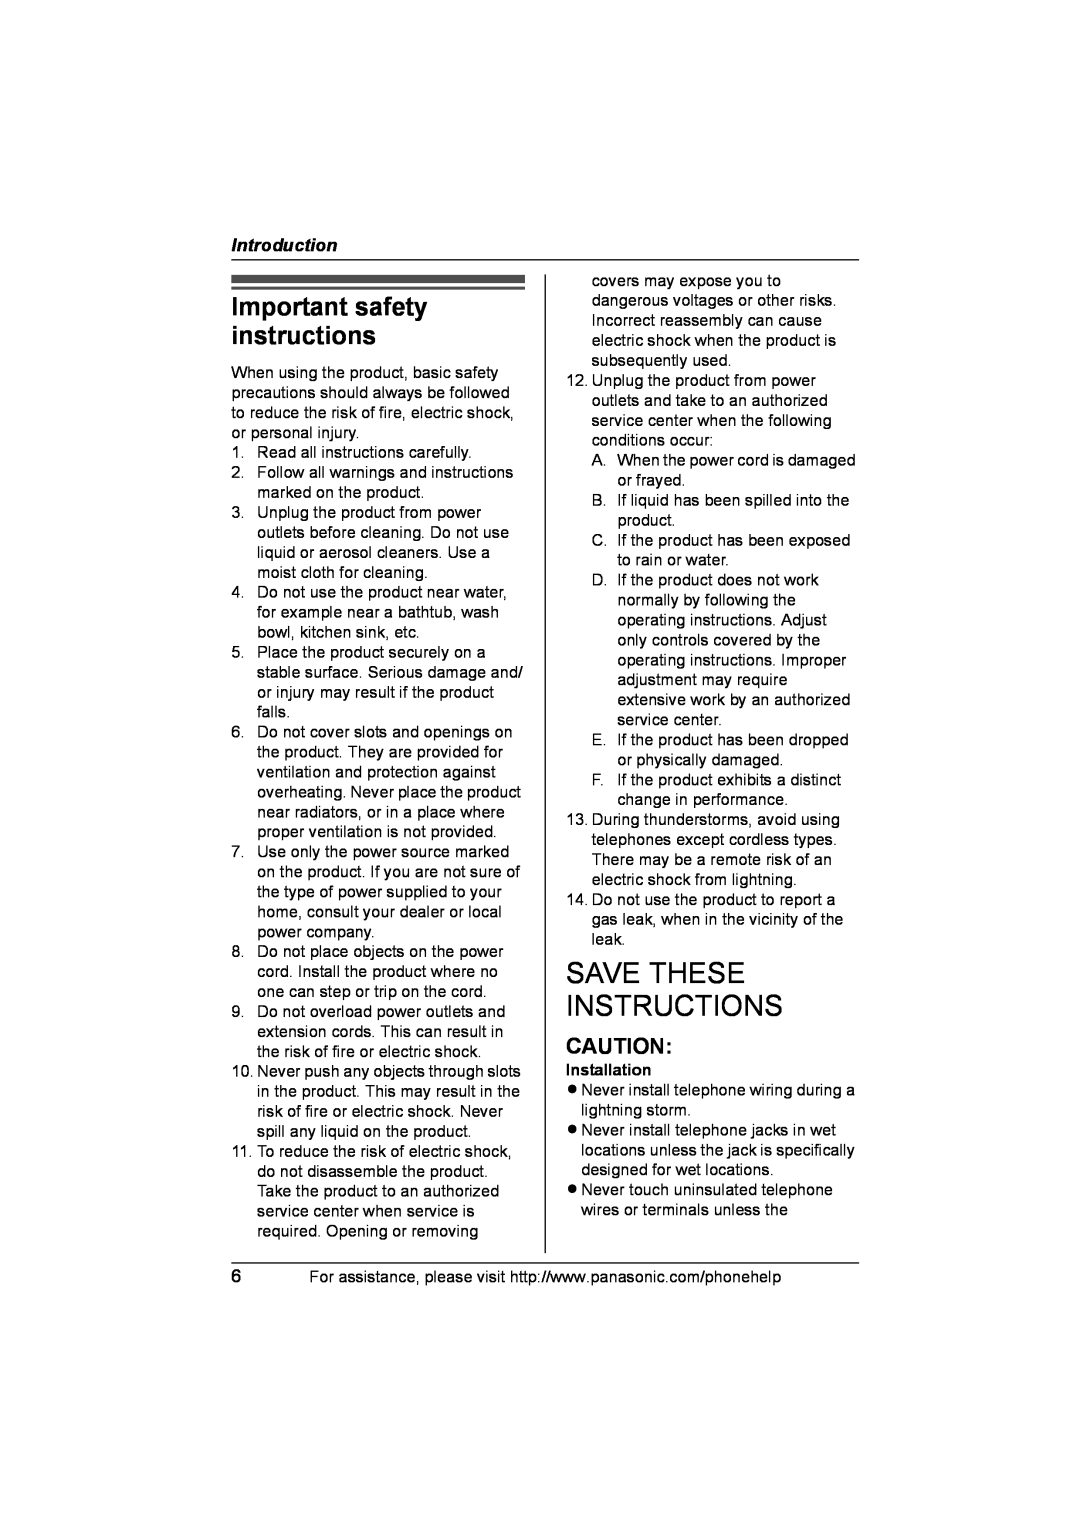 Panasonic KX-TS4100 Important safety instructions, Installation, Save These Instructions, Introduction 